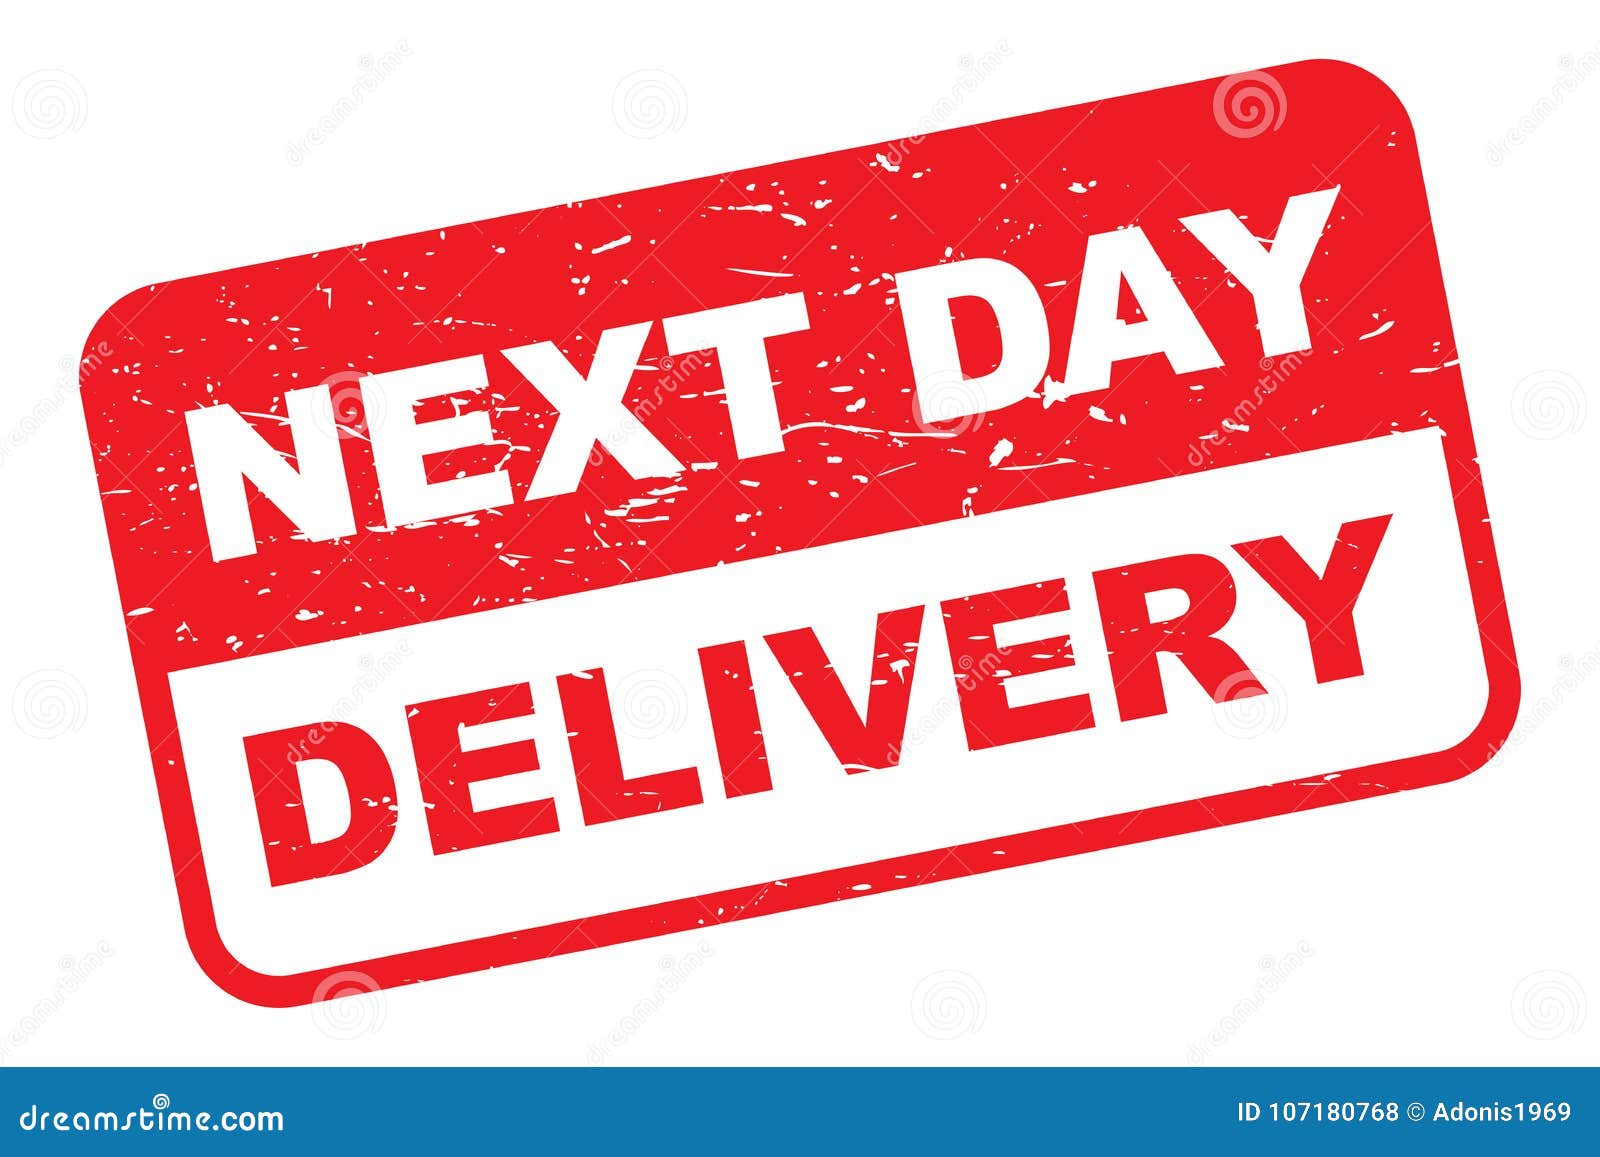 Next day delivery stock vector. Illustration of medicines - 107180768